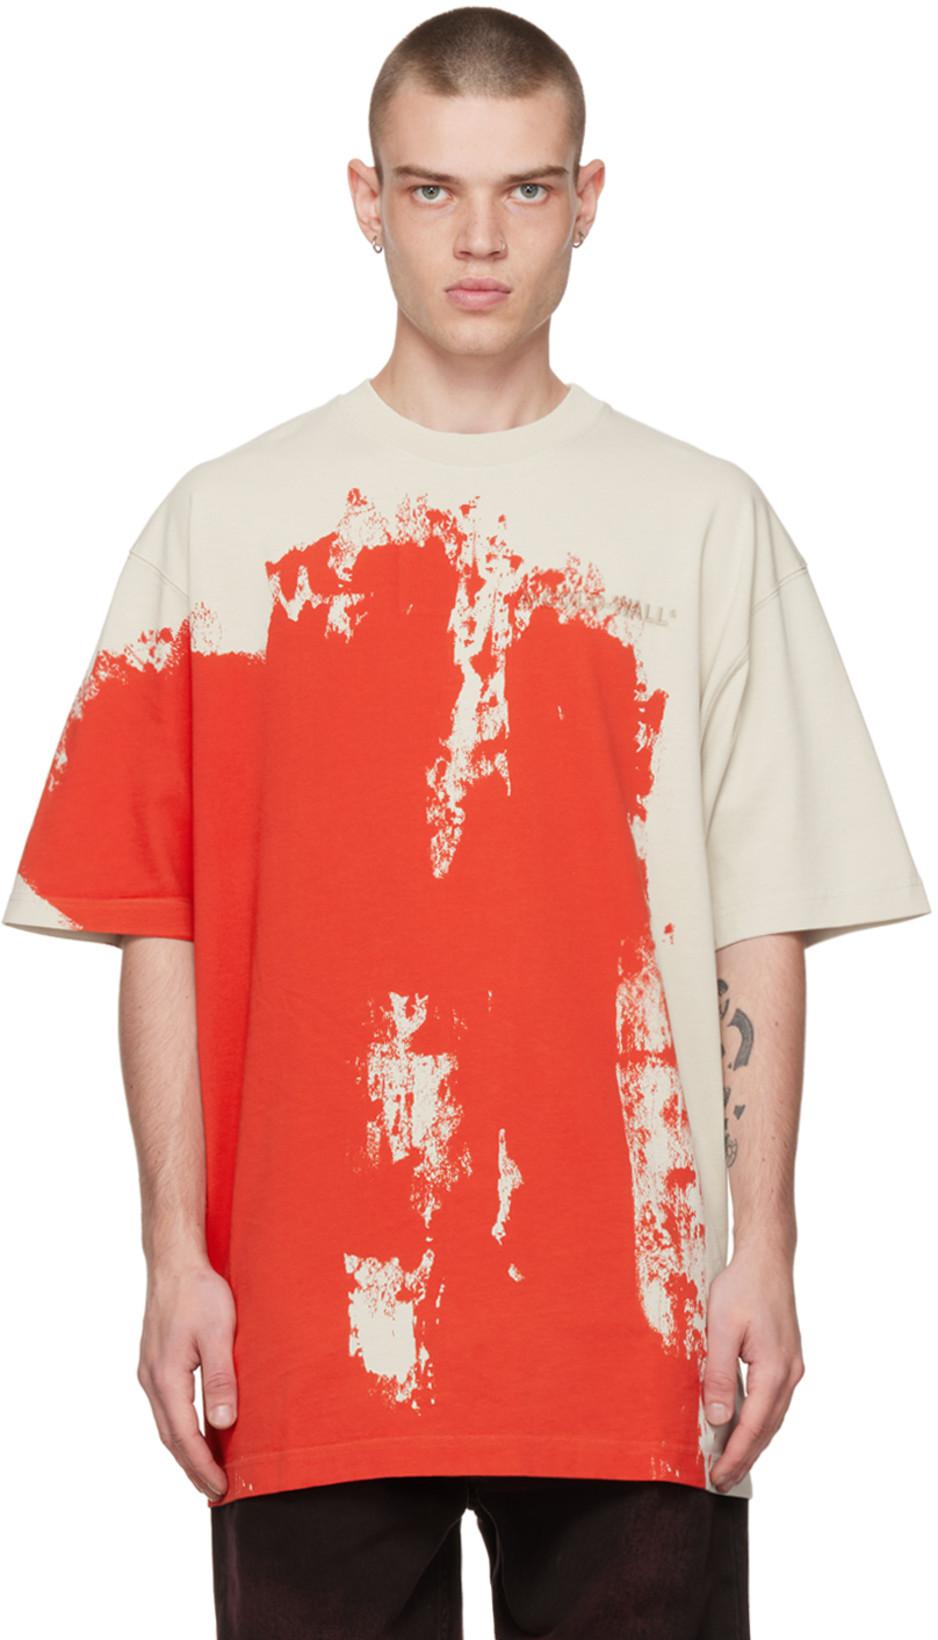 Off-White & Red Print T-Shirt by A-COLD-WALL*